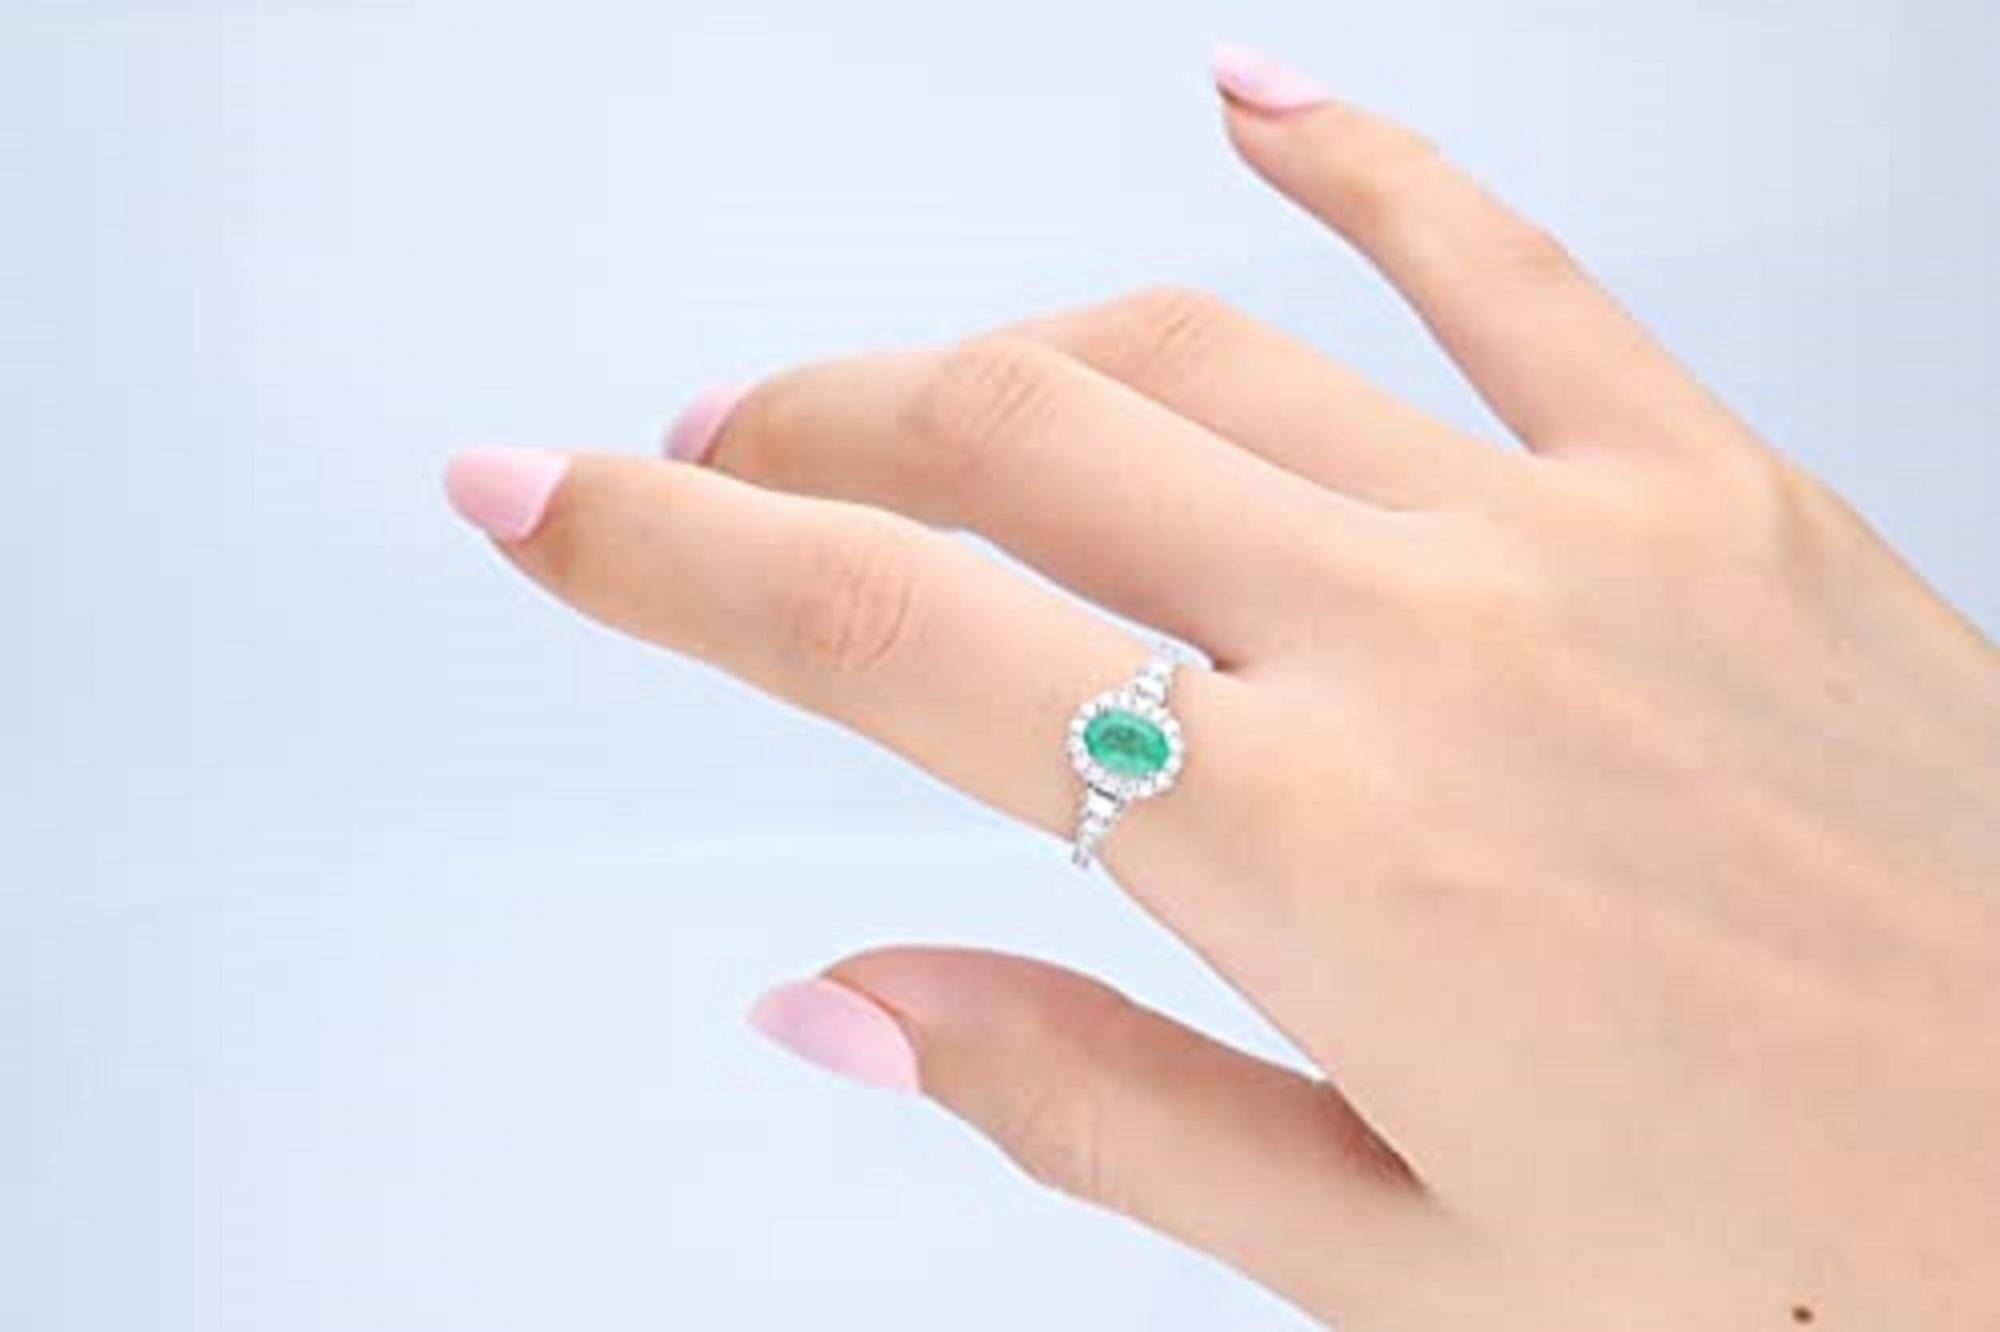 Decorate yourself in elegance with this Ring is crafted from 14-karat White Gold by Gin & Grace. This Ring is made up of 7x5 mm Oval-Cut Emerald (1 pcs) 0.68 carat and Round-cut White Diamond (28 Pcs) 0.13 Carat, Baguette-cut White Diamond (2 pcs)